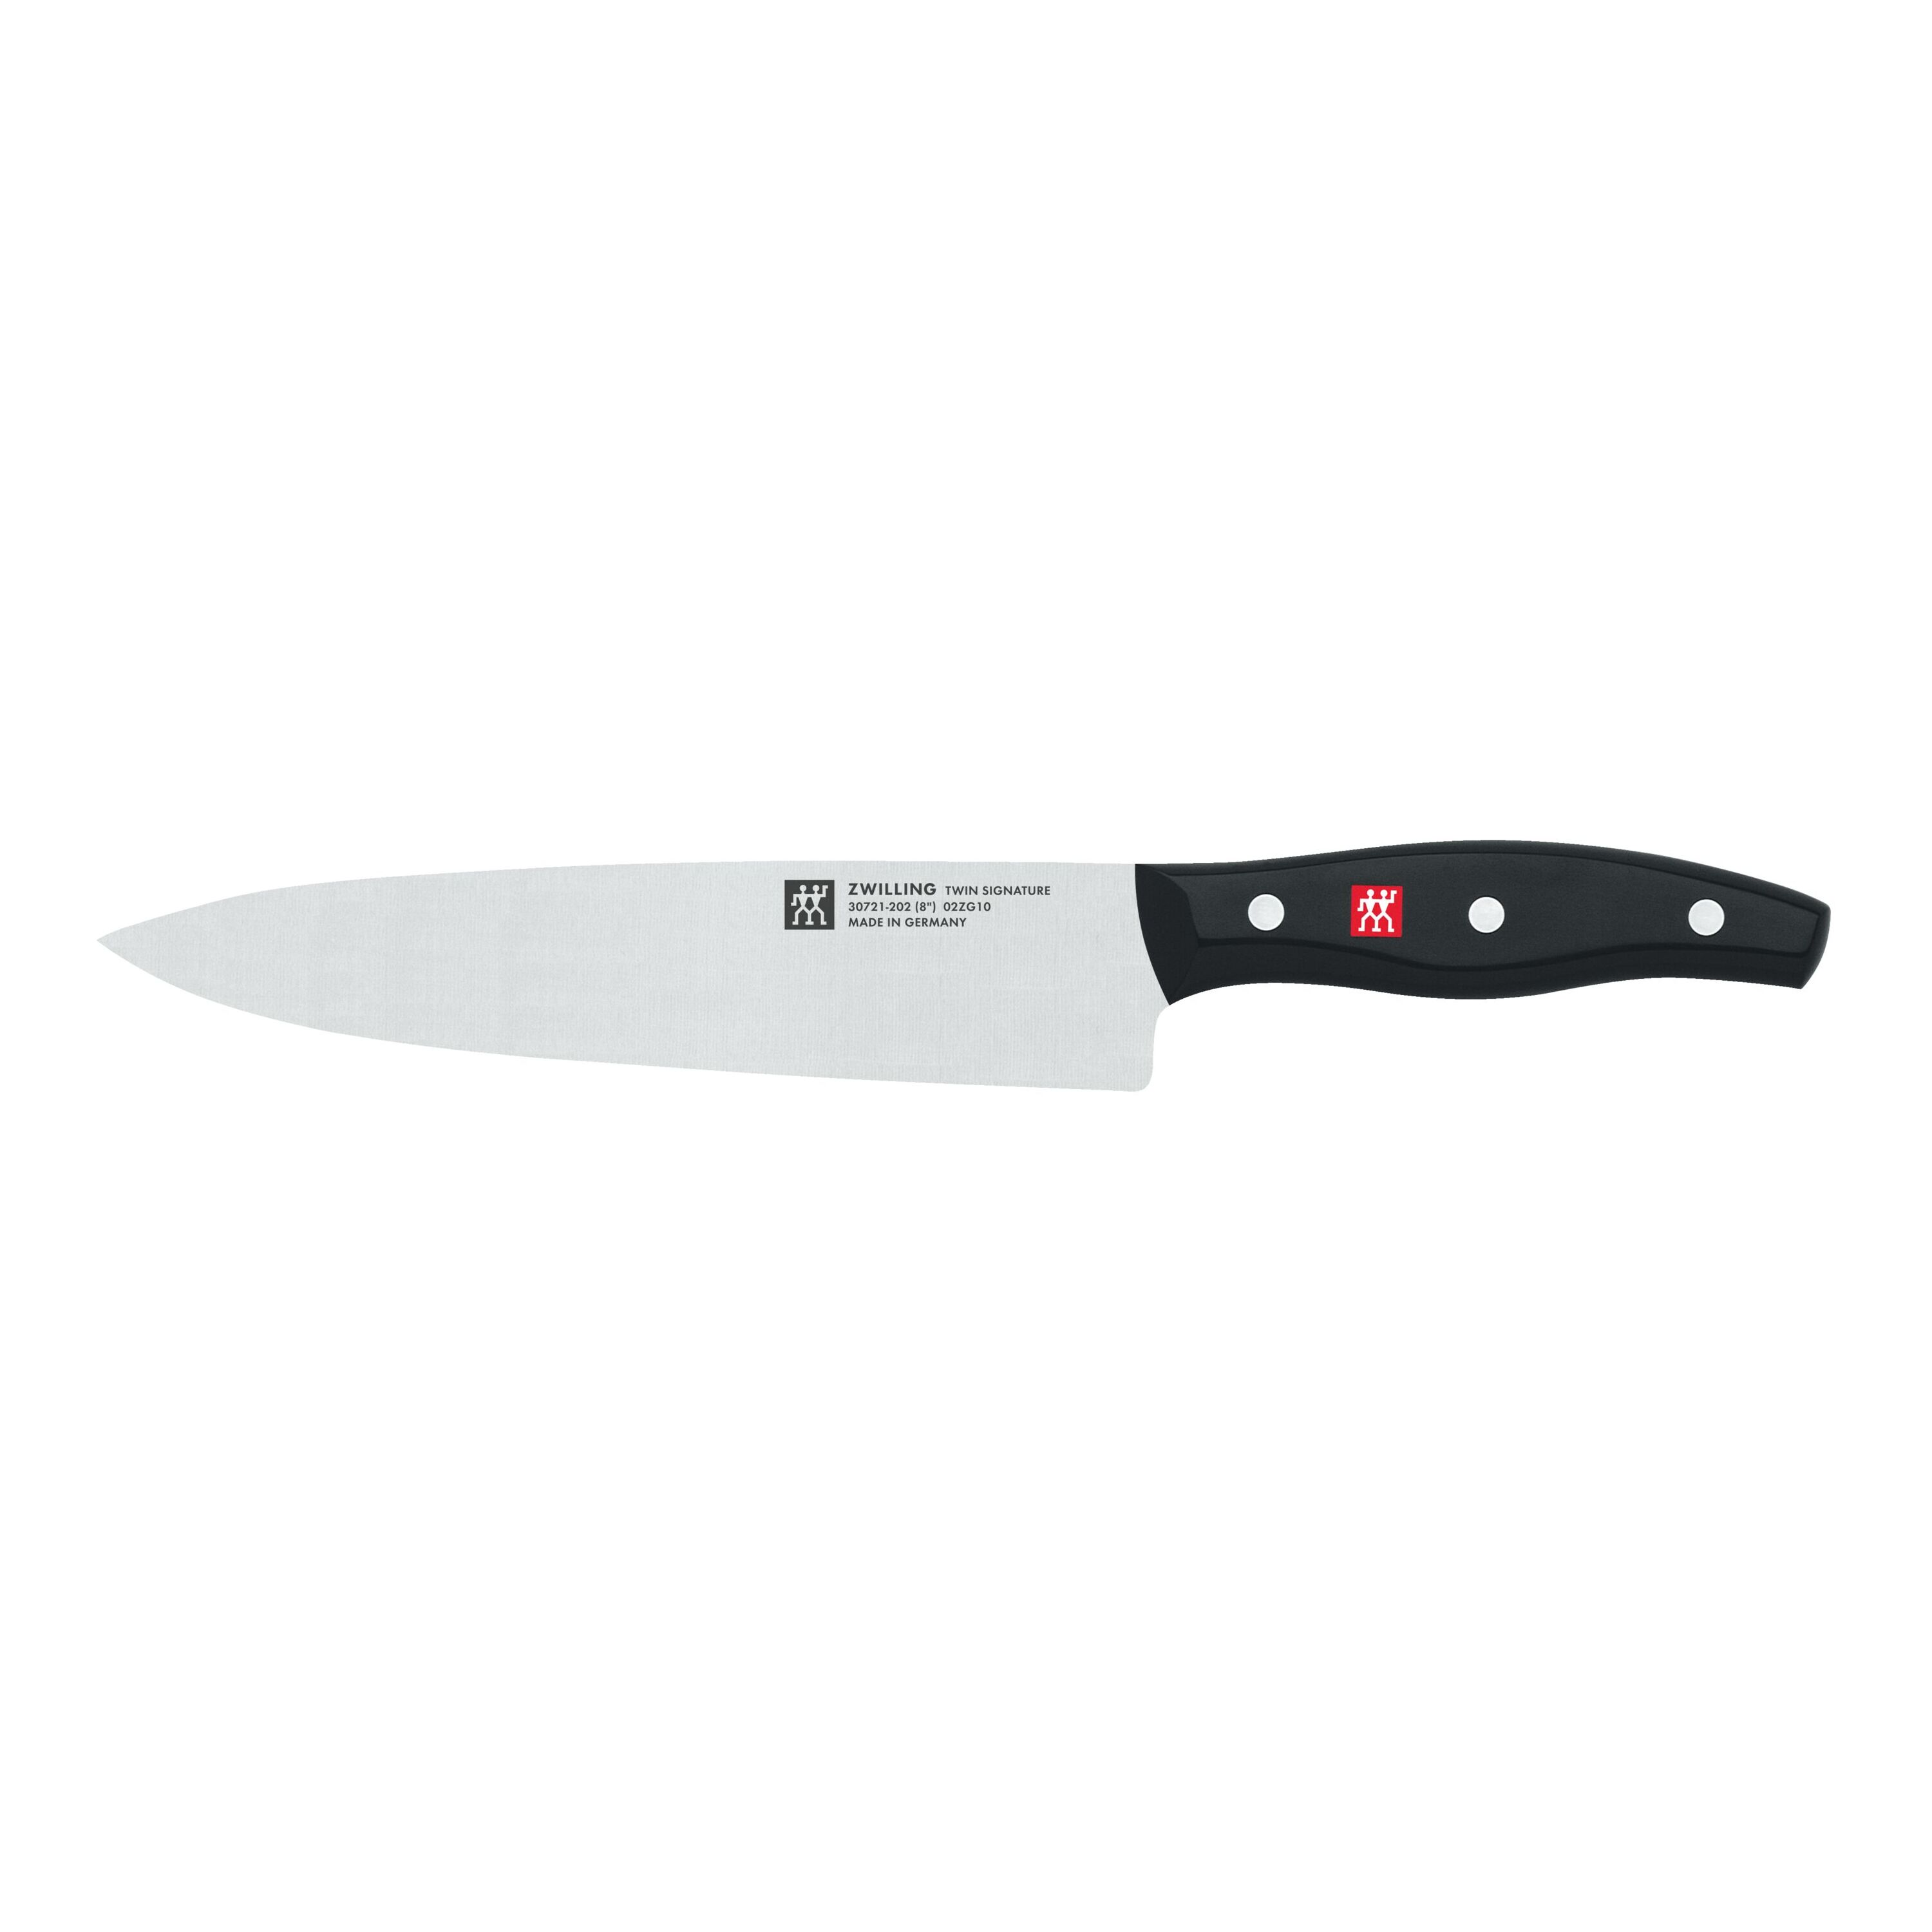 Buy ZWILLING TWIN Signature Chef's knife